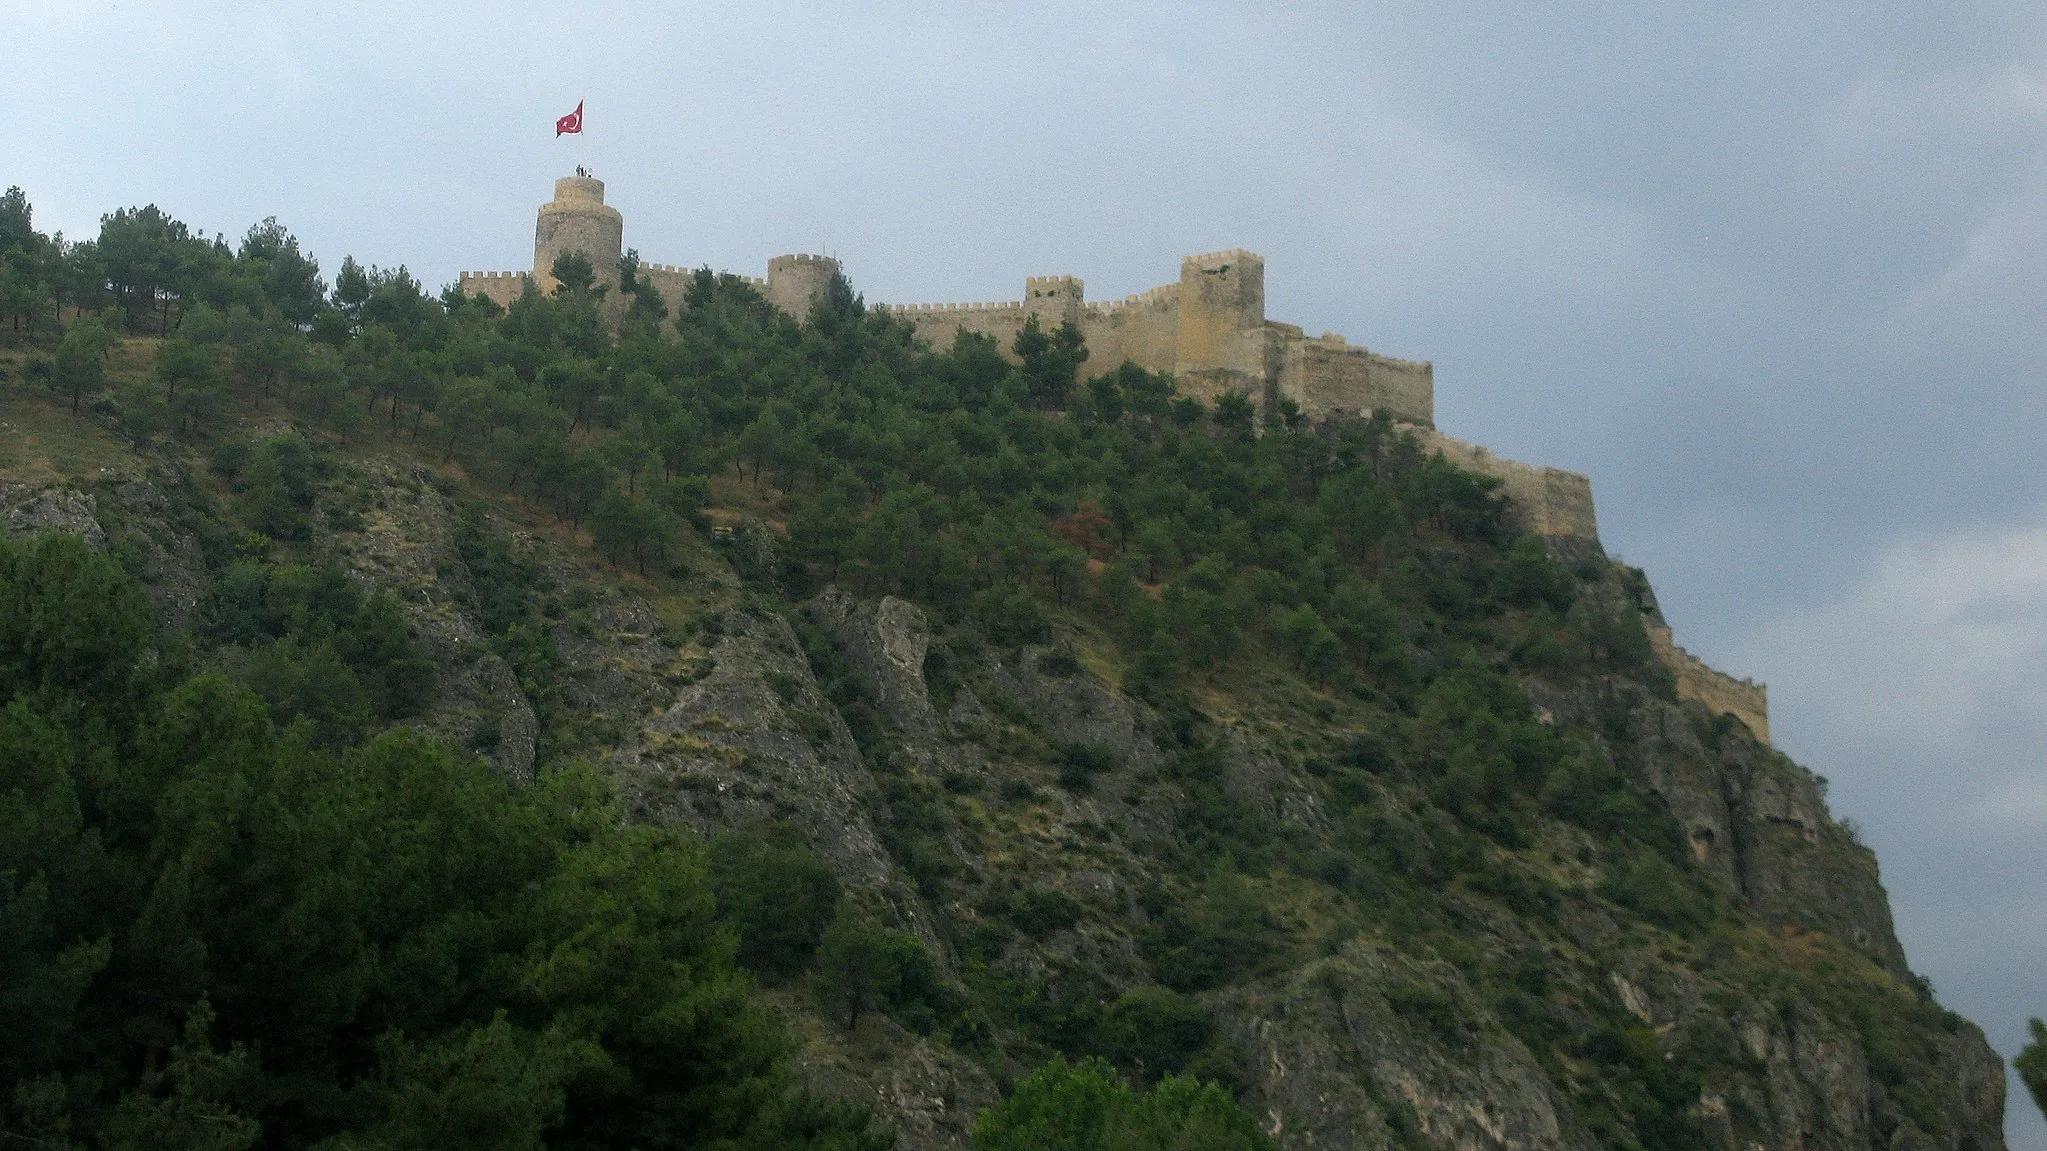 Photo showing: The castle of Boyabat, Province of Sinop, Turkey. The picture was taken from the main road.